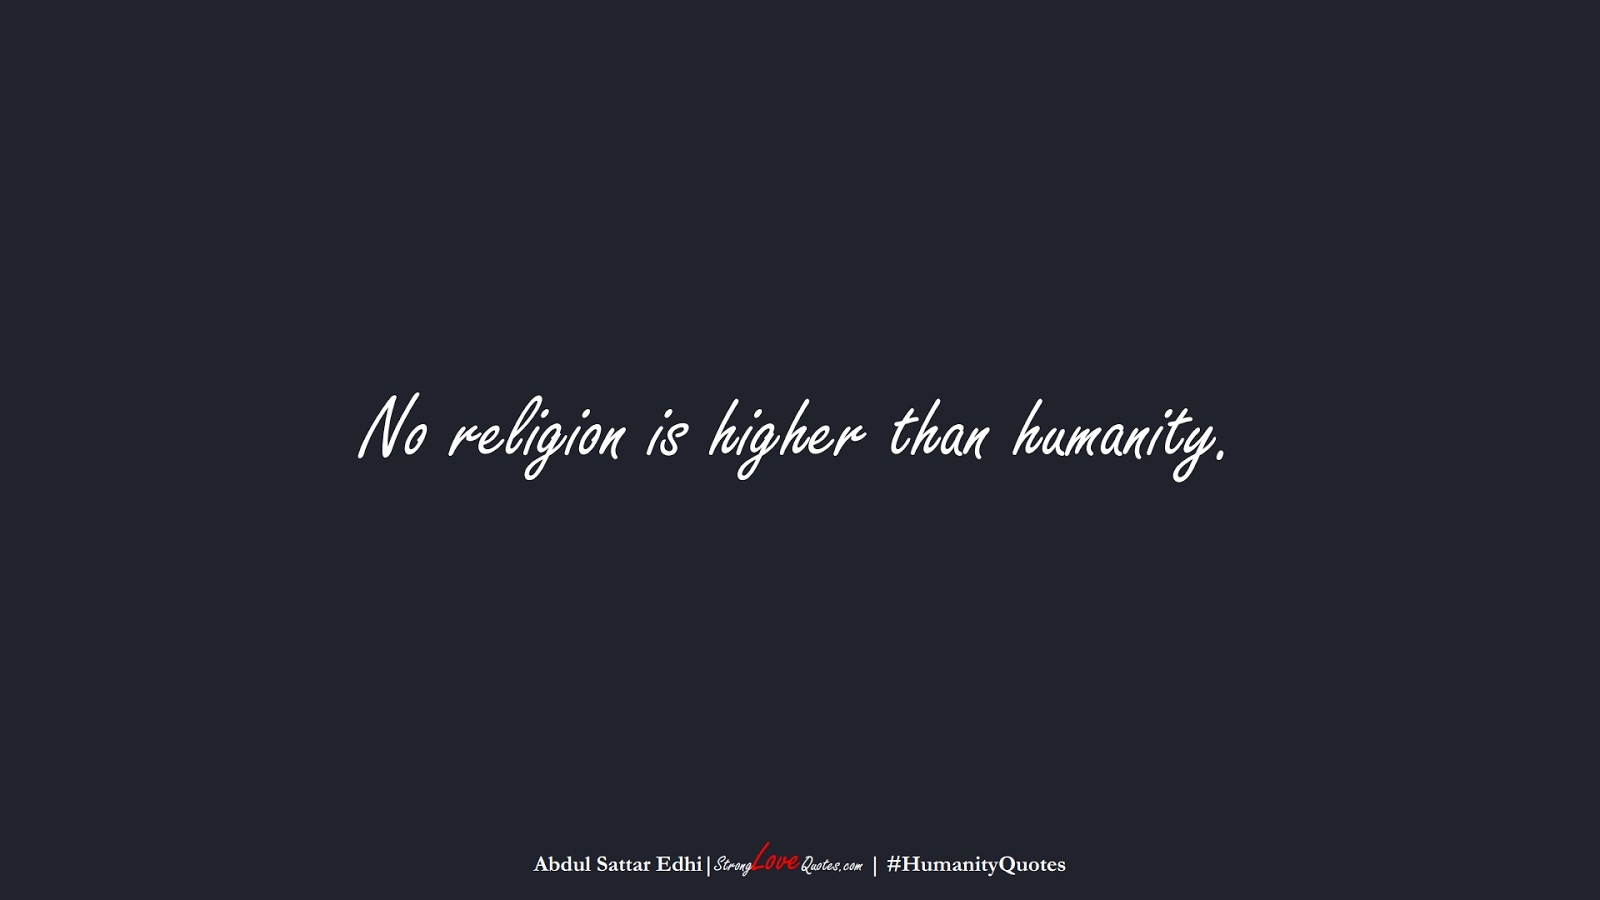 No religion is higher than humanity. (Abdul Sattar Edhi);  #HumanityQuotes